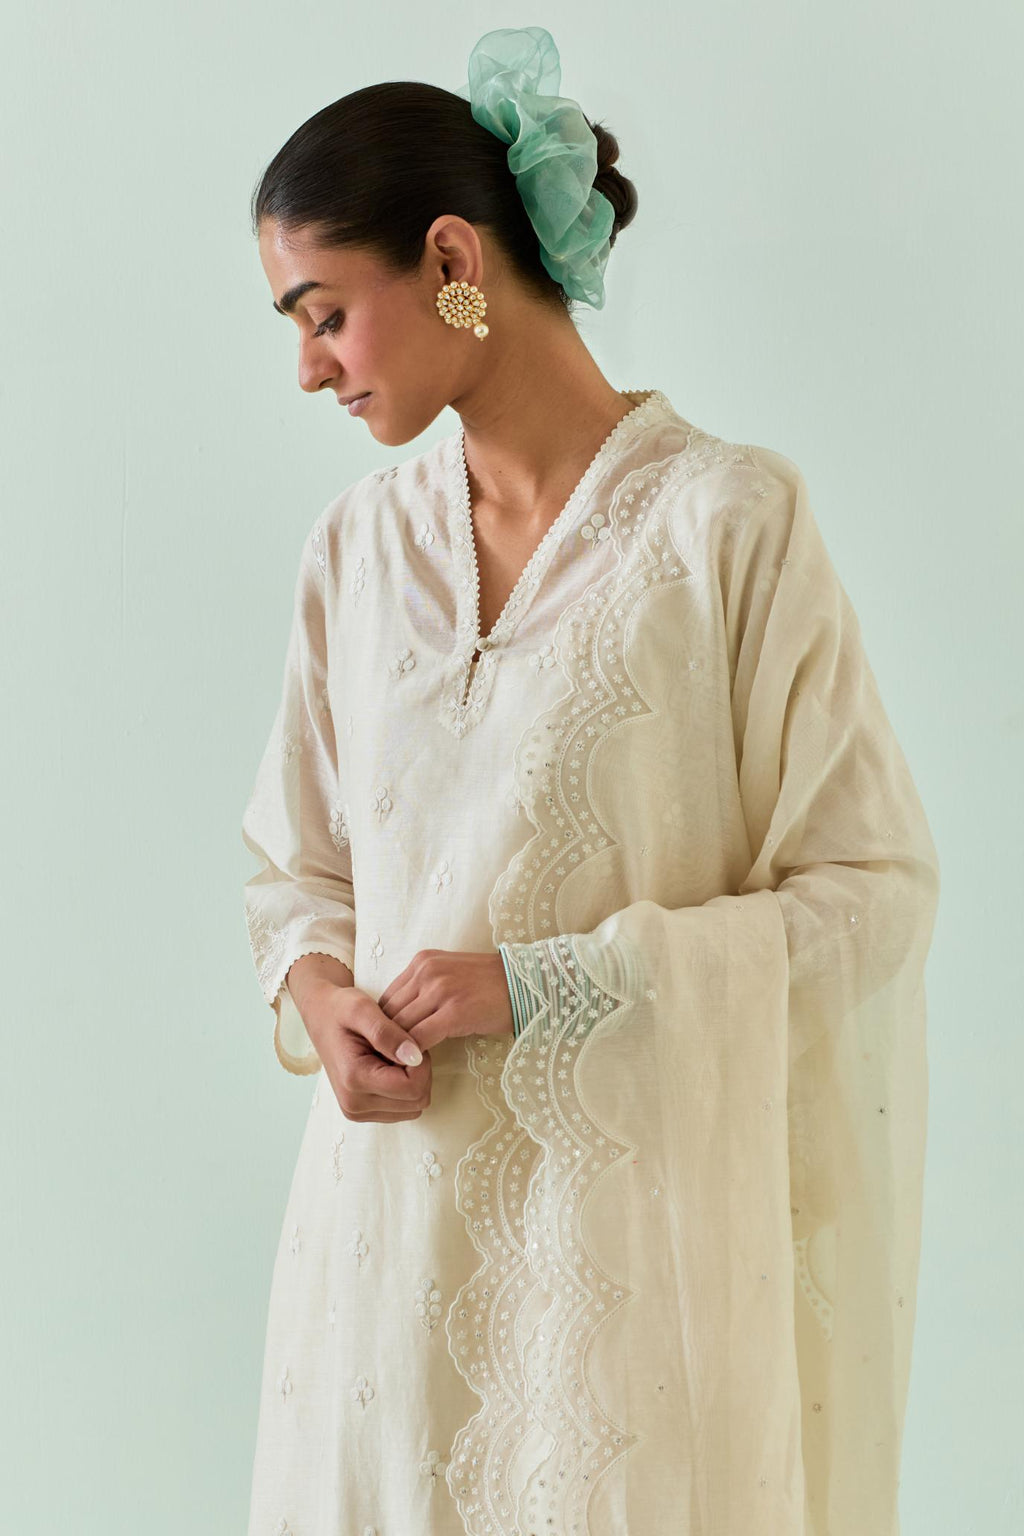 Off white cotton chanderi dupatta with scalloped and embroidered edges.